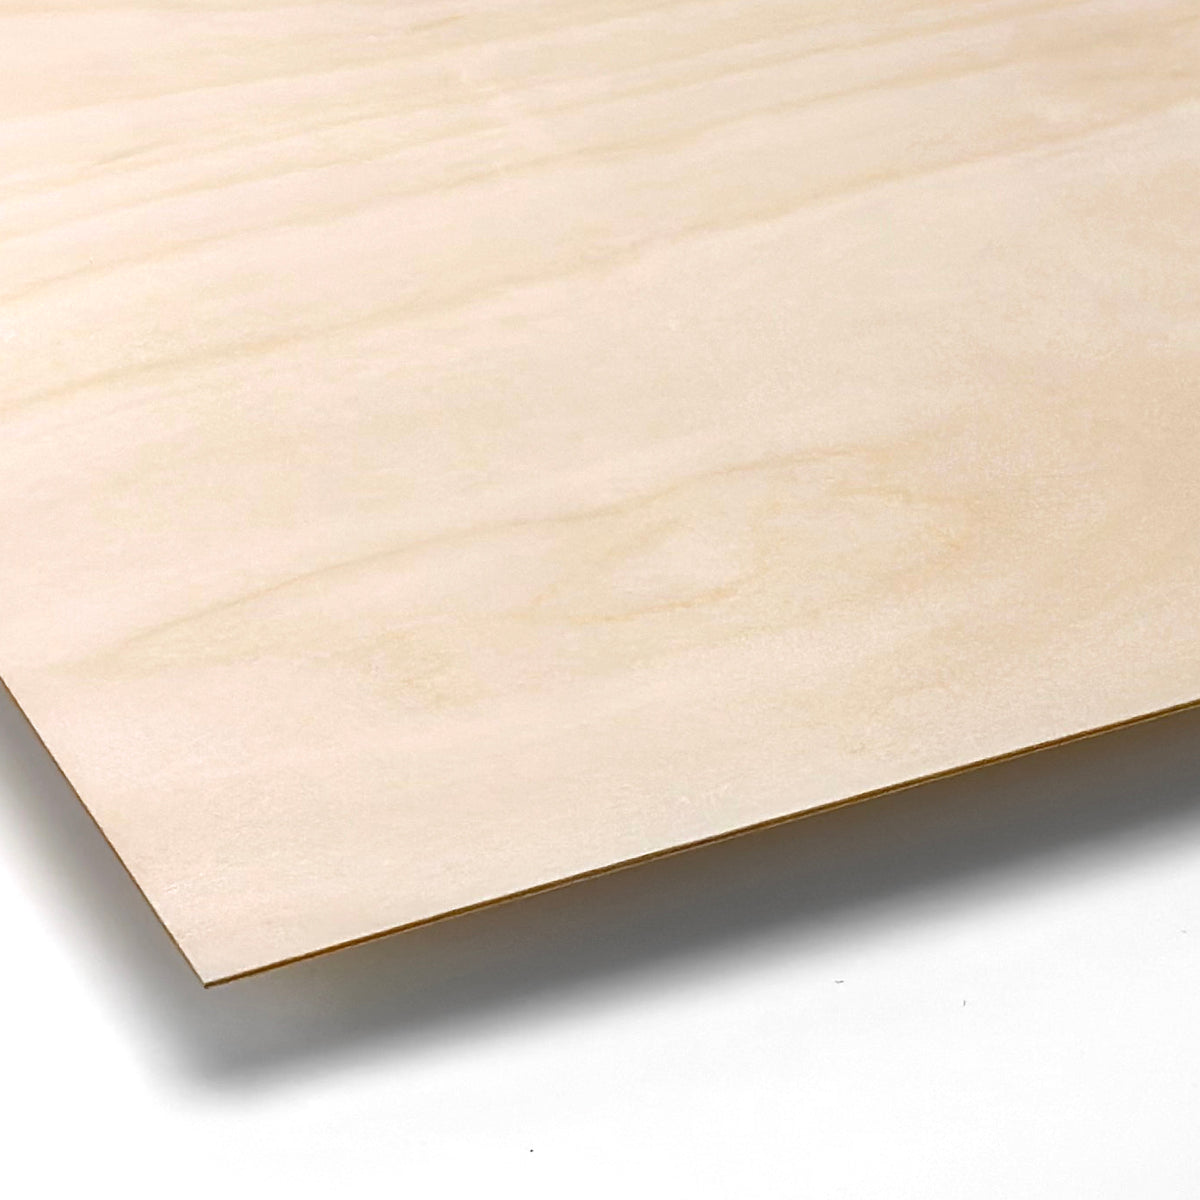 Butter Laser Plywood 600 x 400 x 3mm - Pack of 10 